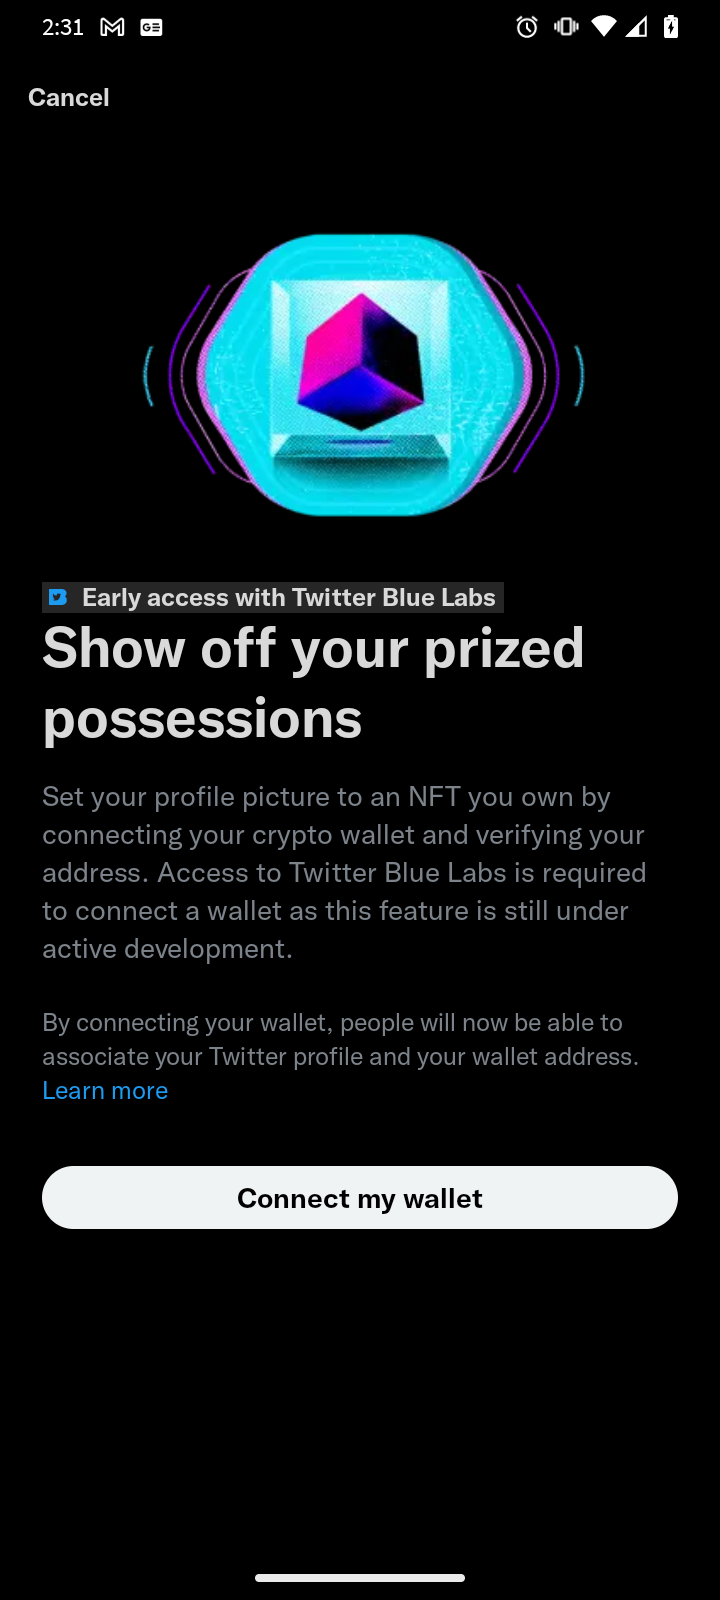 Information on NFT profile pictures on Twitter Blue